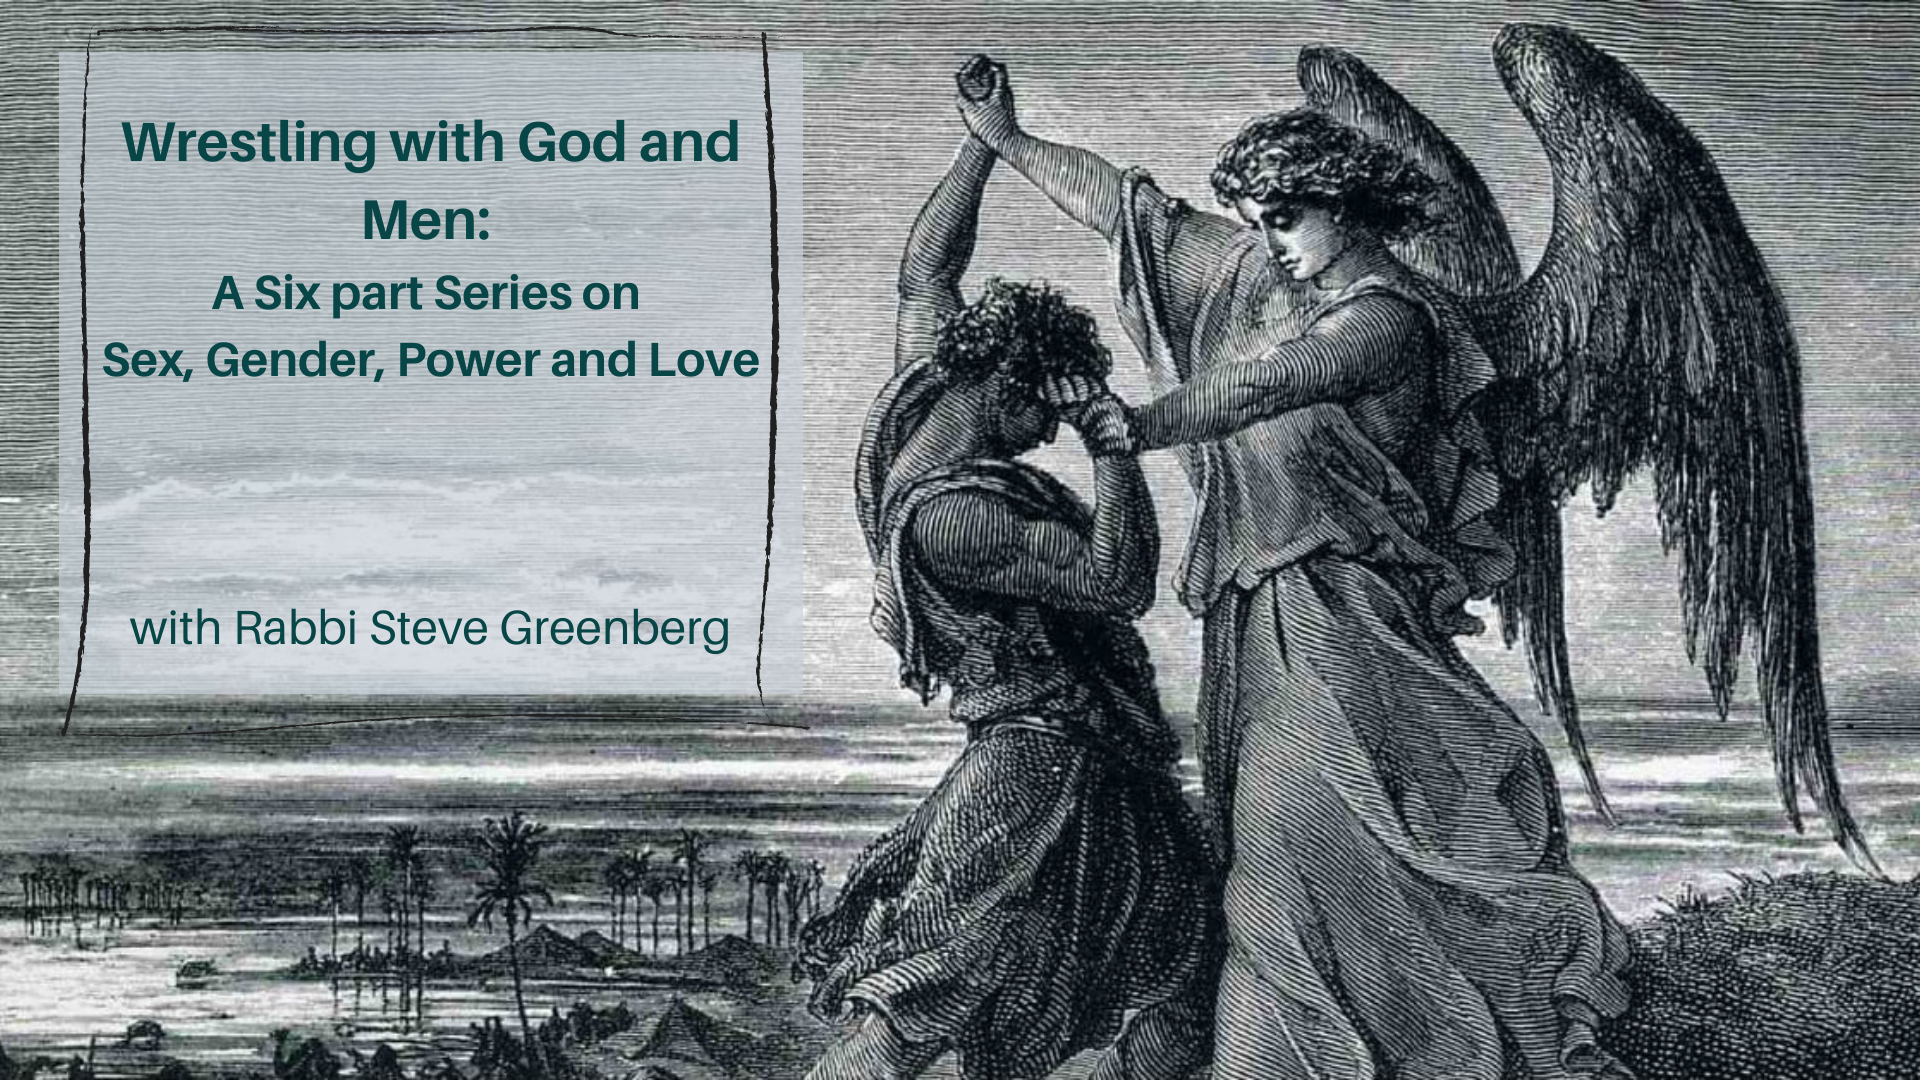 Wrestling with God and Men_ A Six part Series on Sex, Gender, Power and Love